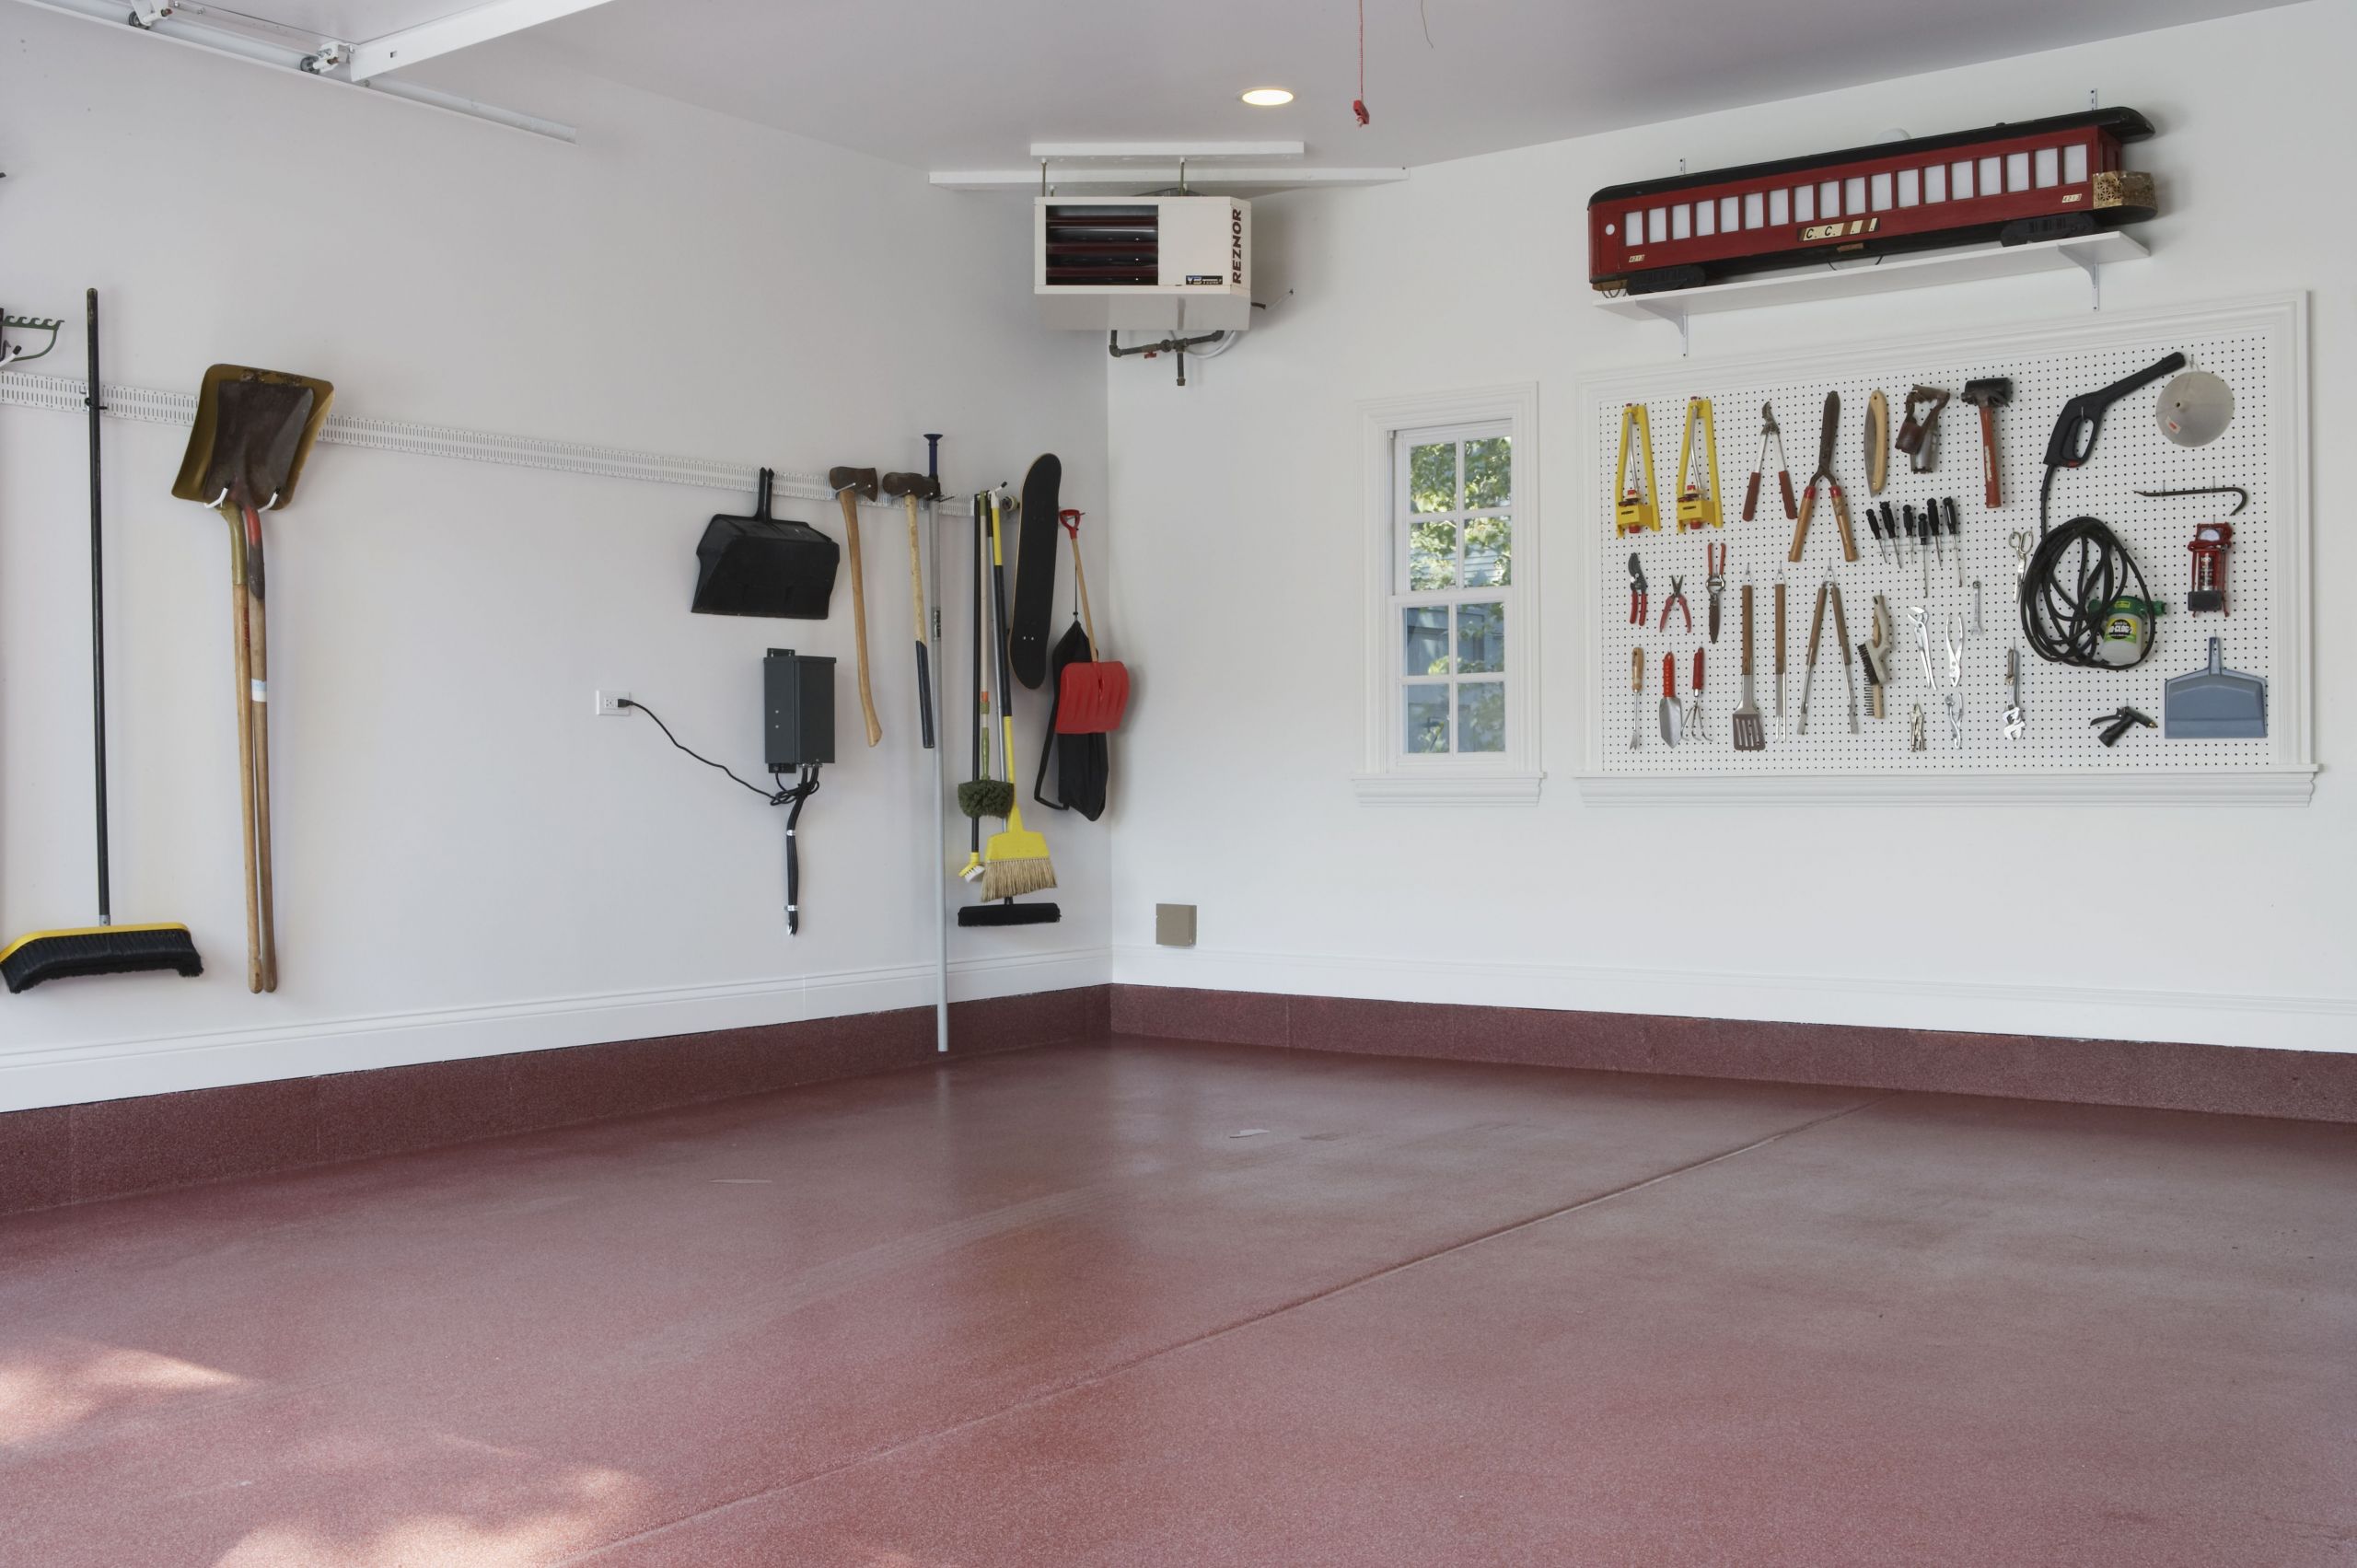 Garage Wall Organizers System
 Before You Buy a Garage Wall System